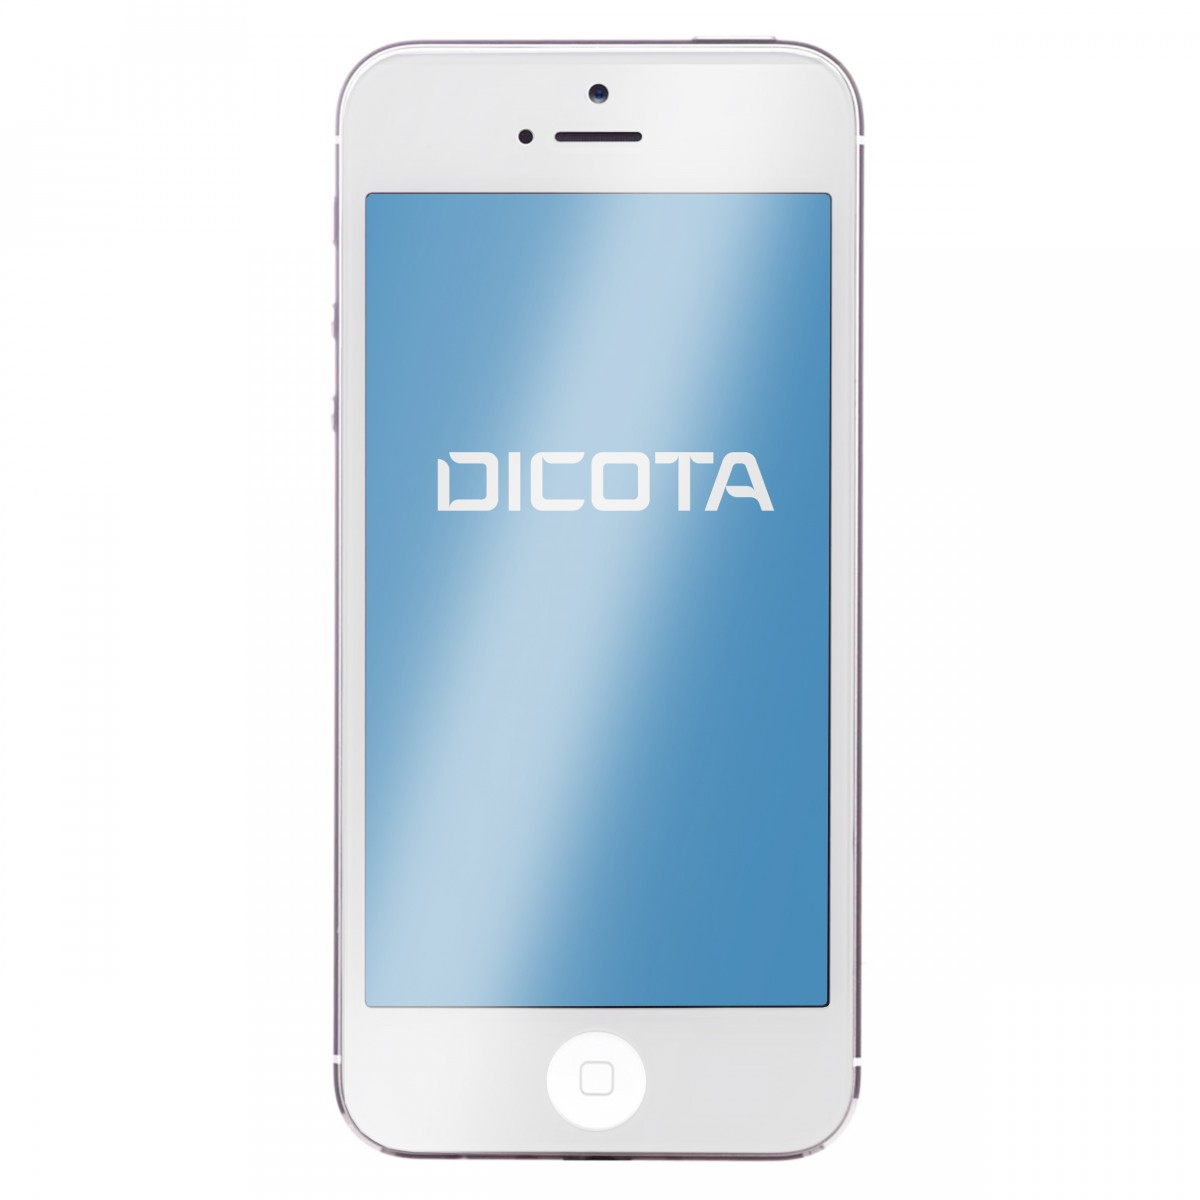 Dicota D30952 display privacy filters